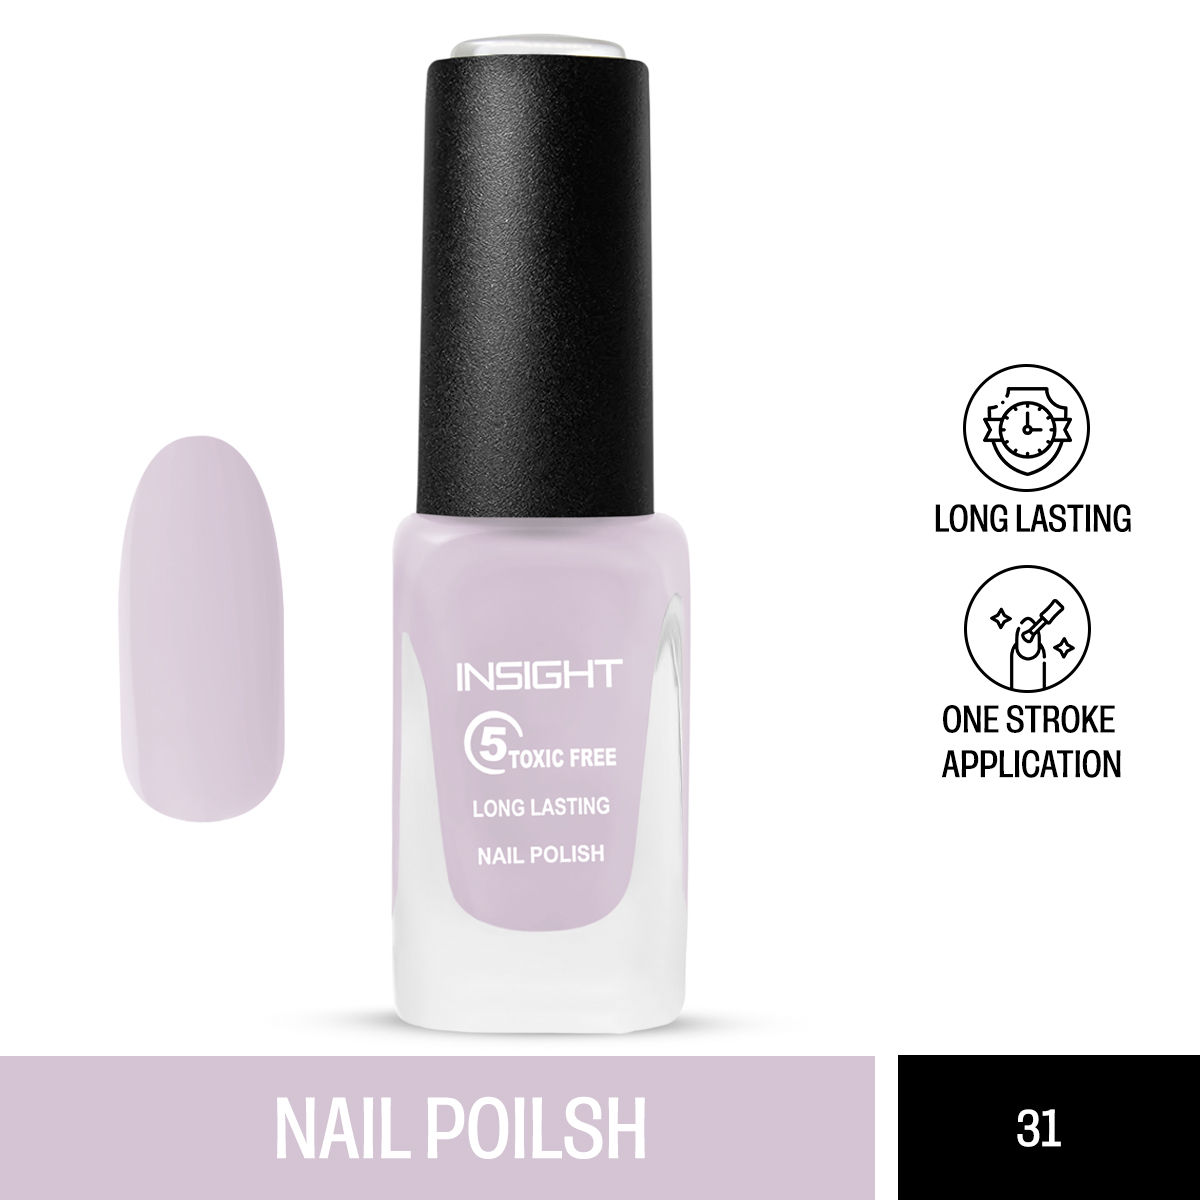 Buy Insight Nail Polish 15 ml Online at Low Prices in India - Amazon.in